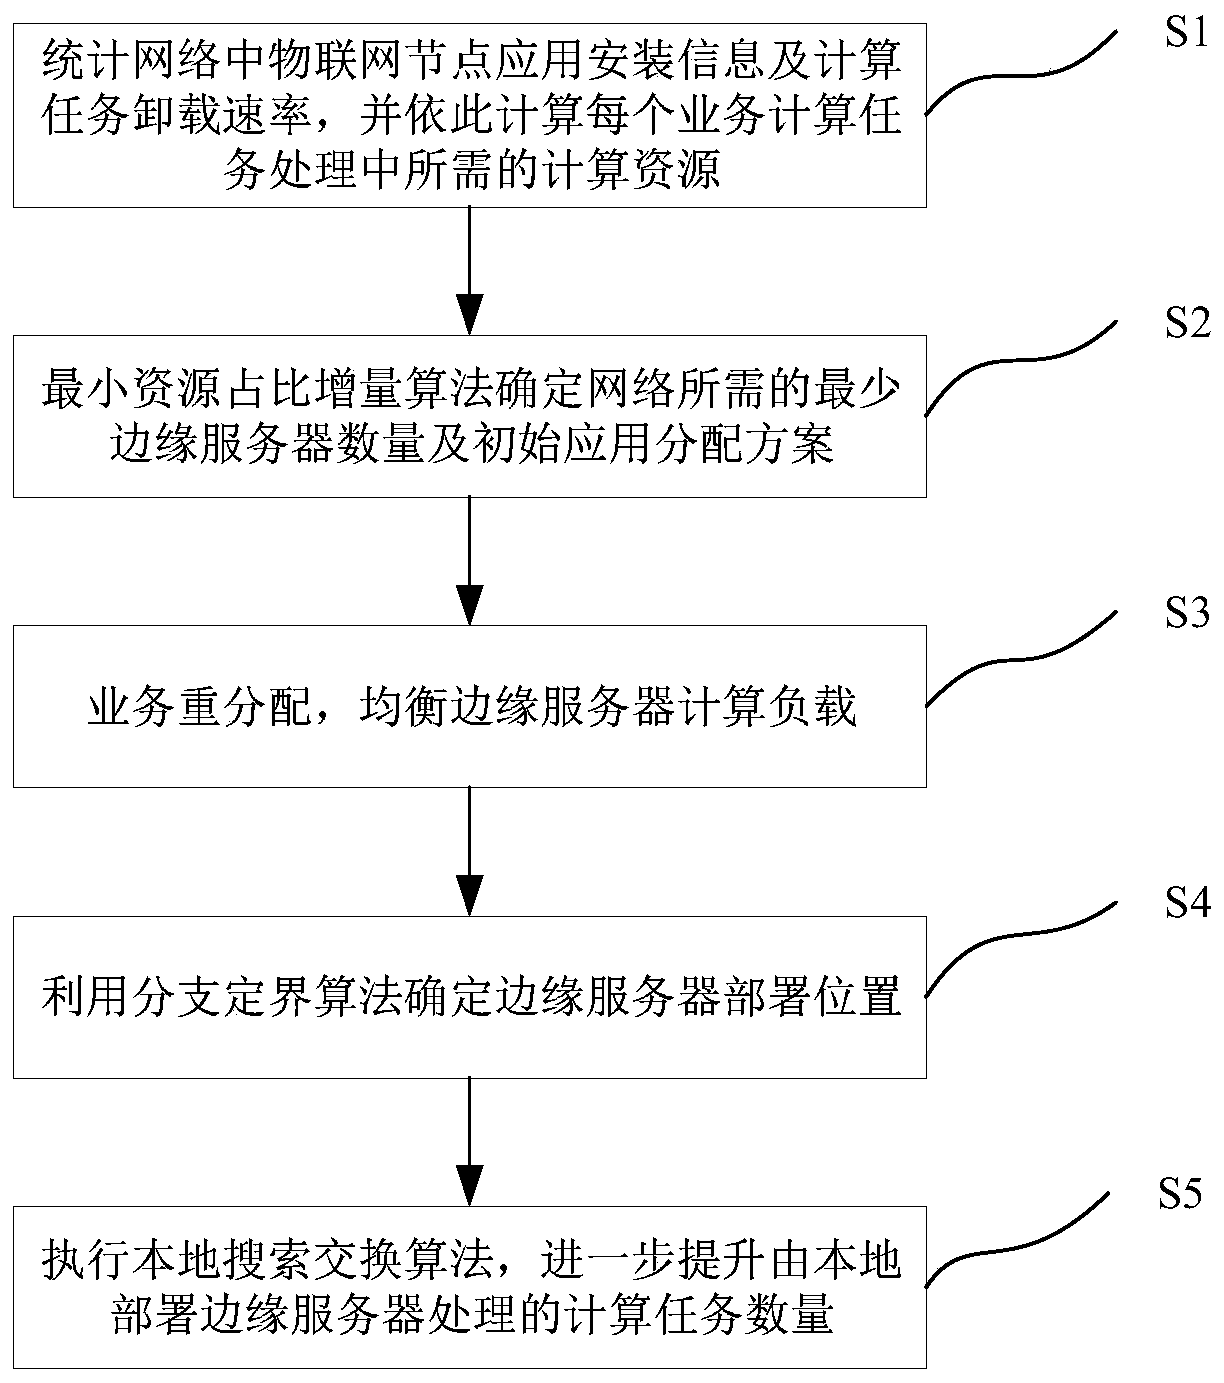 Cooperative service deployment and service allocation method for regional edge computing internet of things